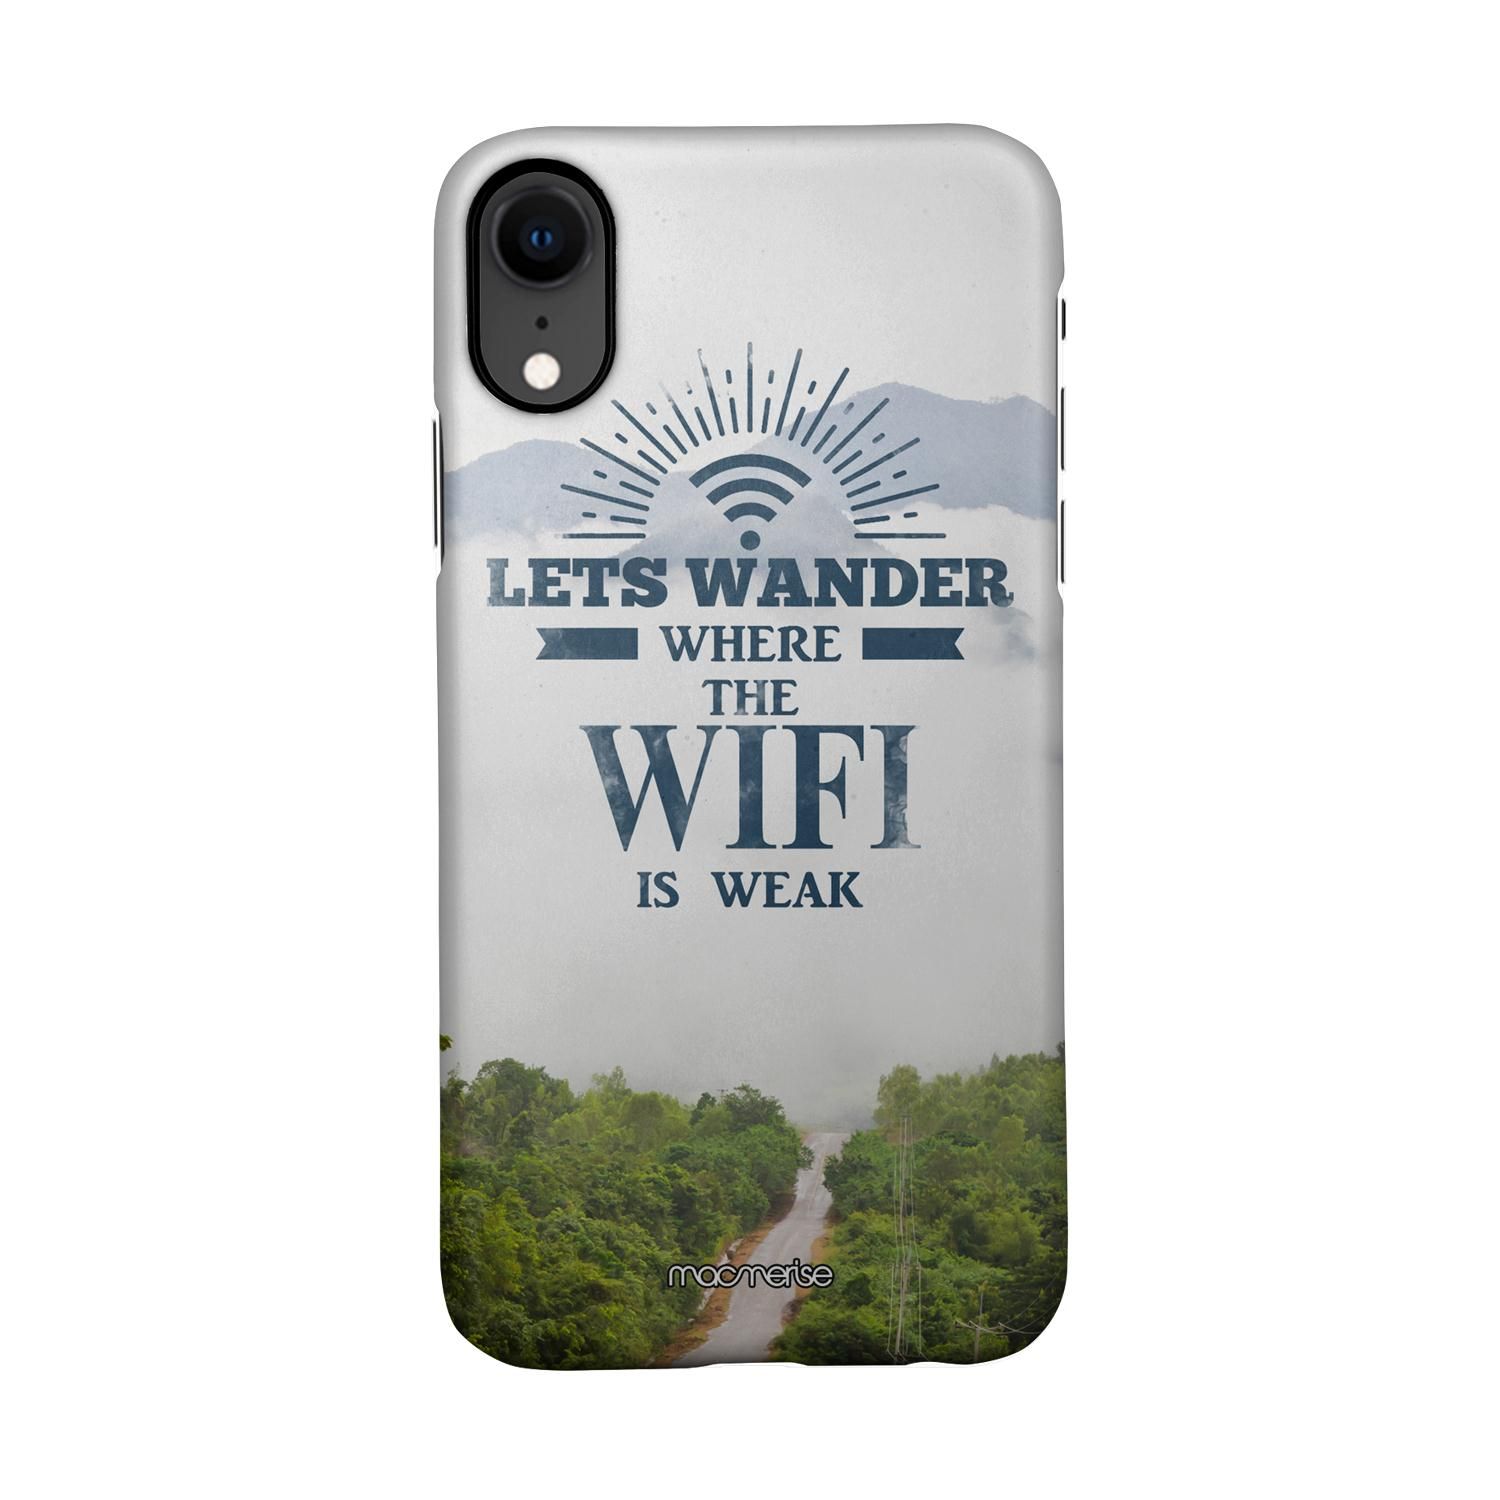 Buy Wander without Wifi - Sleek Phone Case for iPhone XR Online